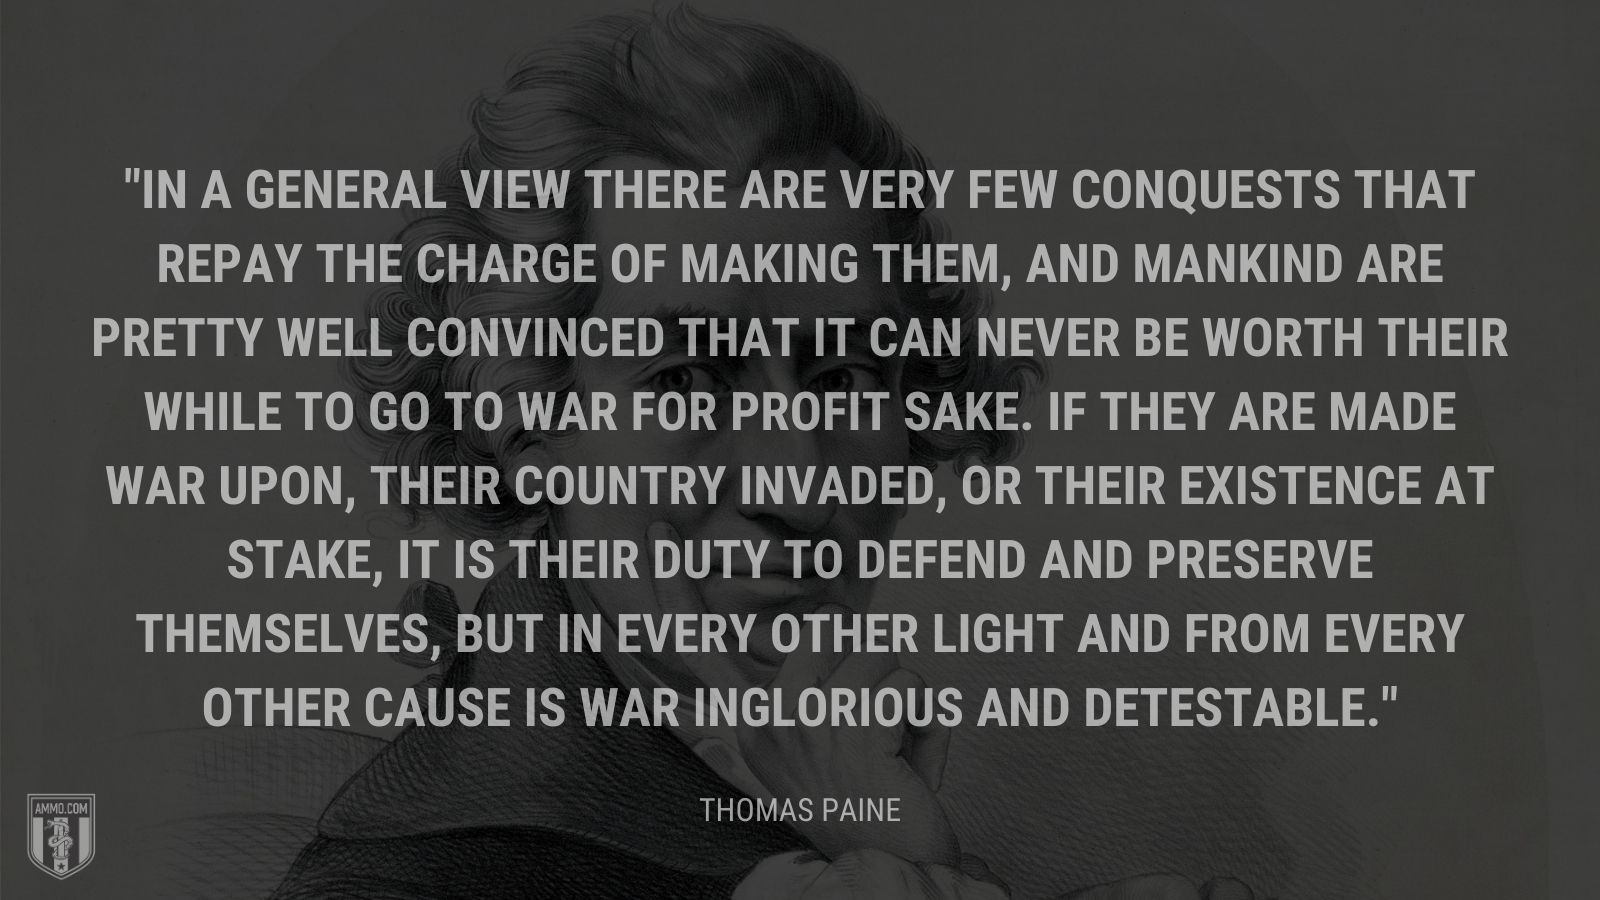 “In a general view there are very few conquests that repay the charge of making them, and mankind are pretty well convinced that it can never be worth their while to go to war for profit sake. If they are made war upon, their country invaded, or their existence at stake, it is their duty to defend and preserve themselves, but in every other light and from every other cause is war inglorious and detestable.” - Thomas Paine